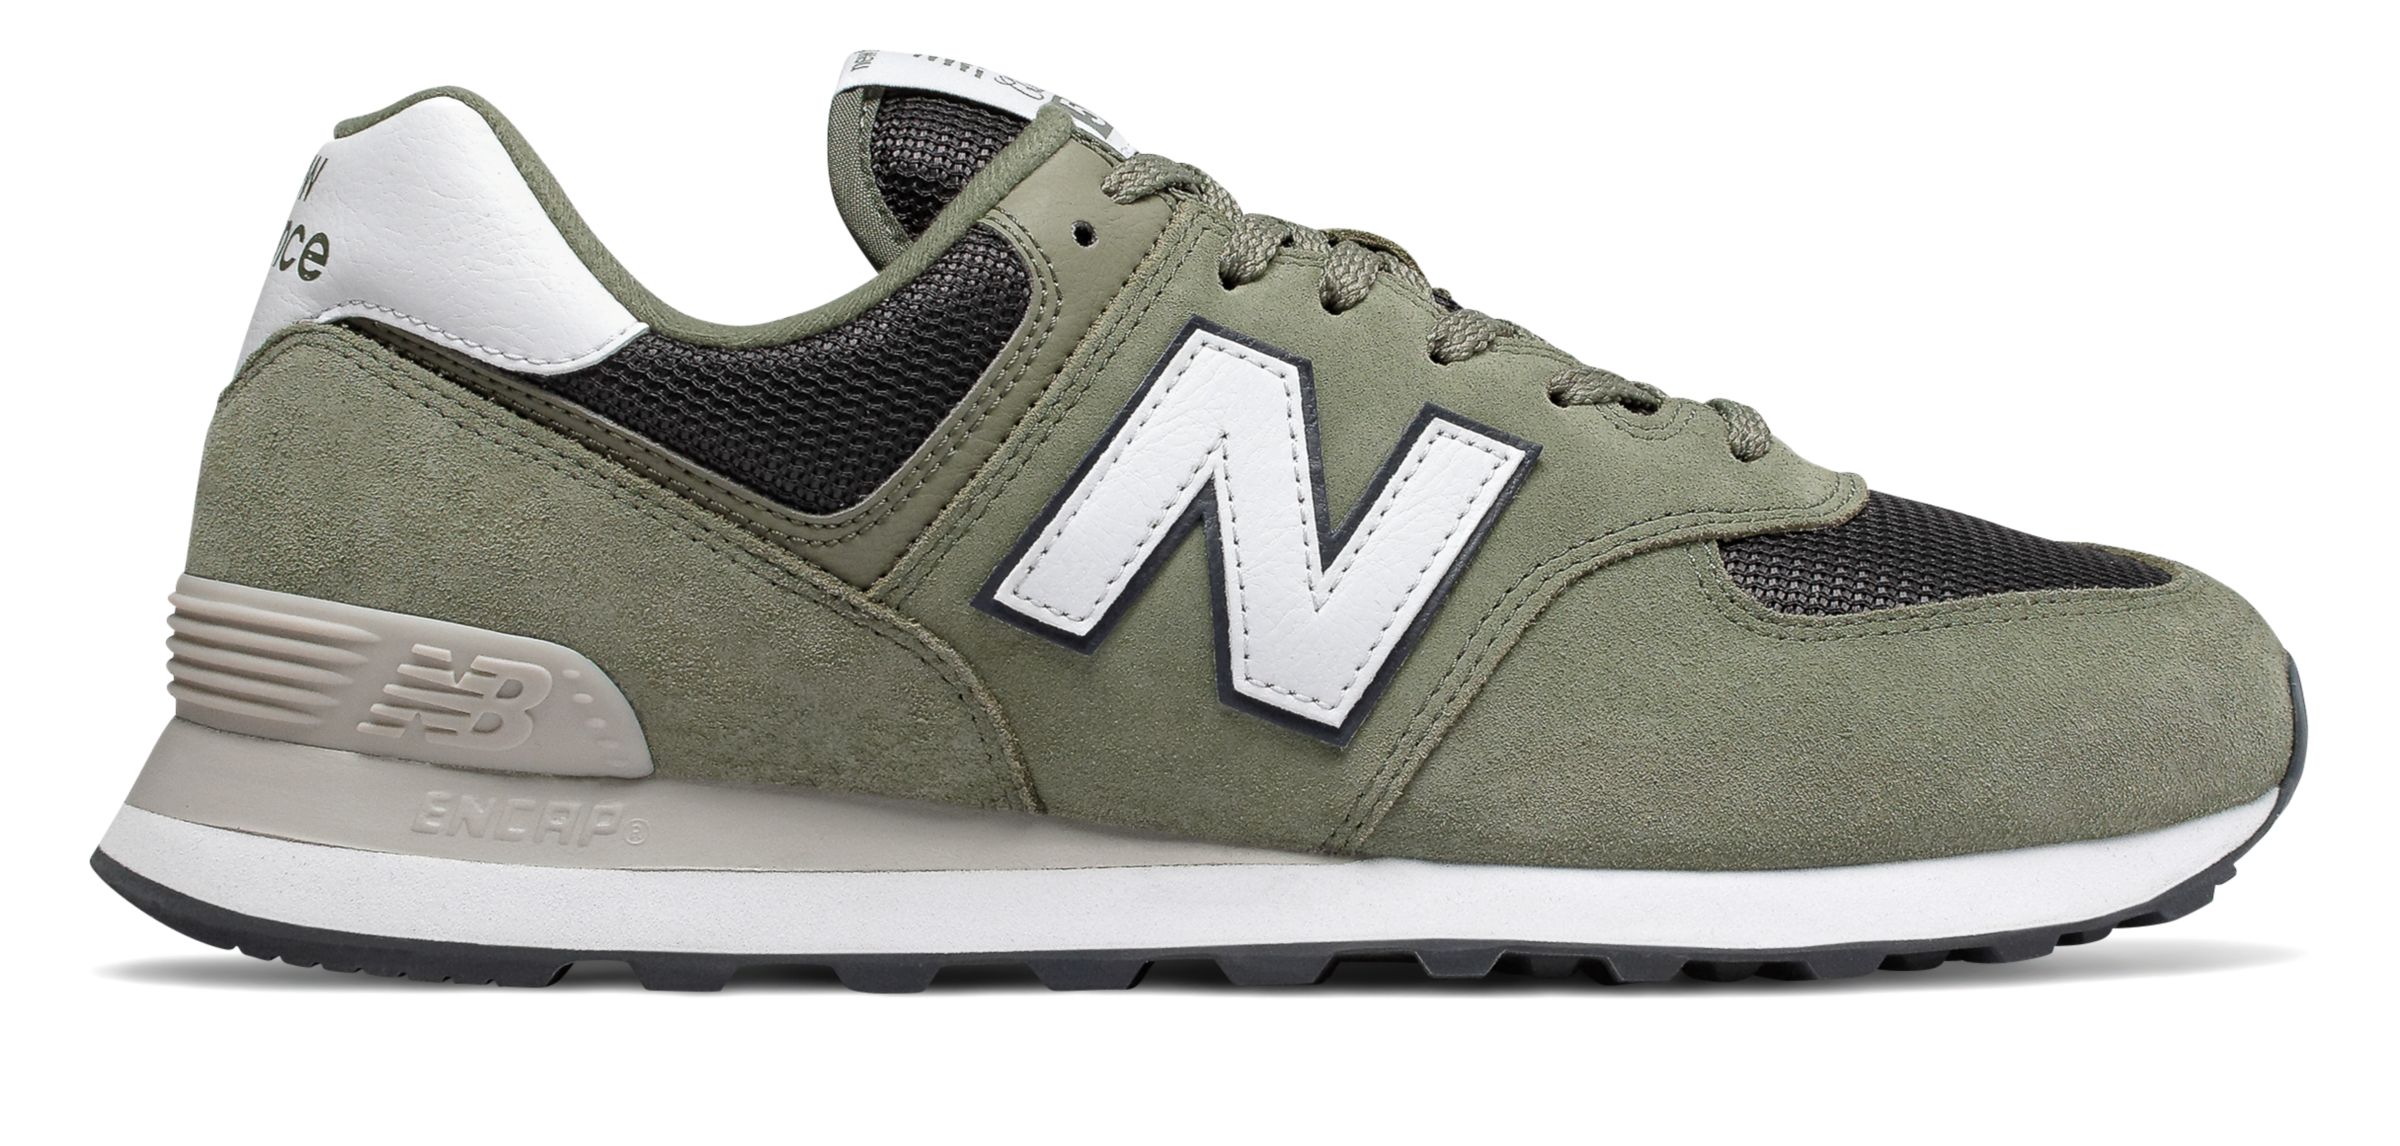 New Balance Men's 574 Shoes Green With Grey | eBay